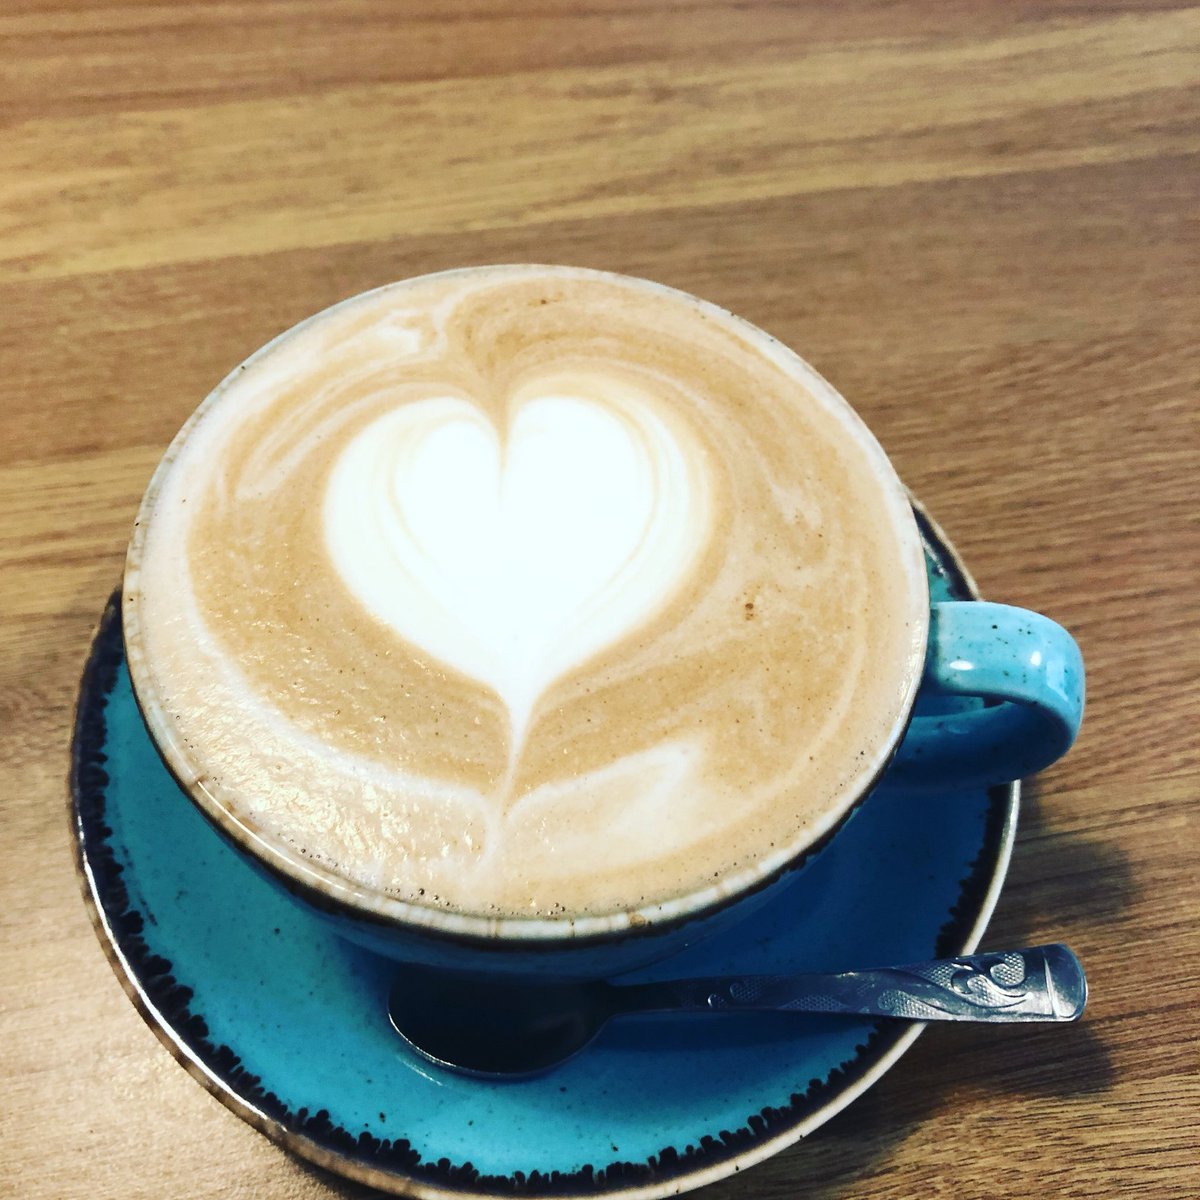 Nearly time for a well deserved bank holiday weekend, why not treat yourself before to a homemade breakfast, cakes or lunch items #cafe #cafelife #coffeeshop #coffee #homemadefood #homemadecakes #takeawaycoffee #breakfast #lunch #afternoonsnacks #hamptonhill